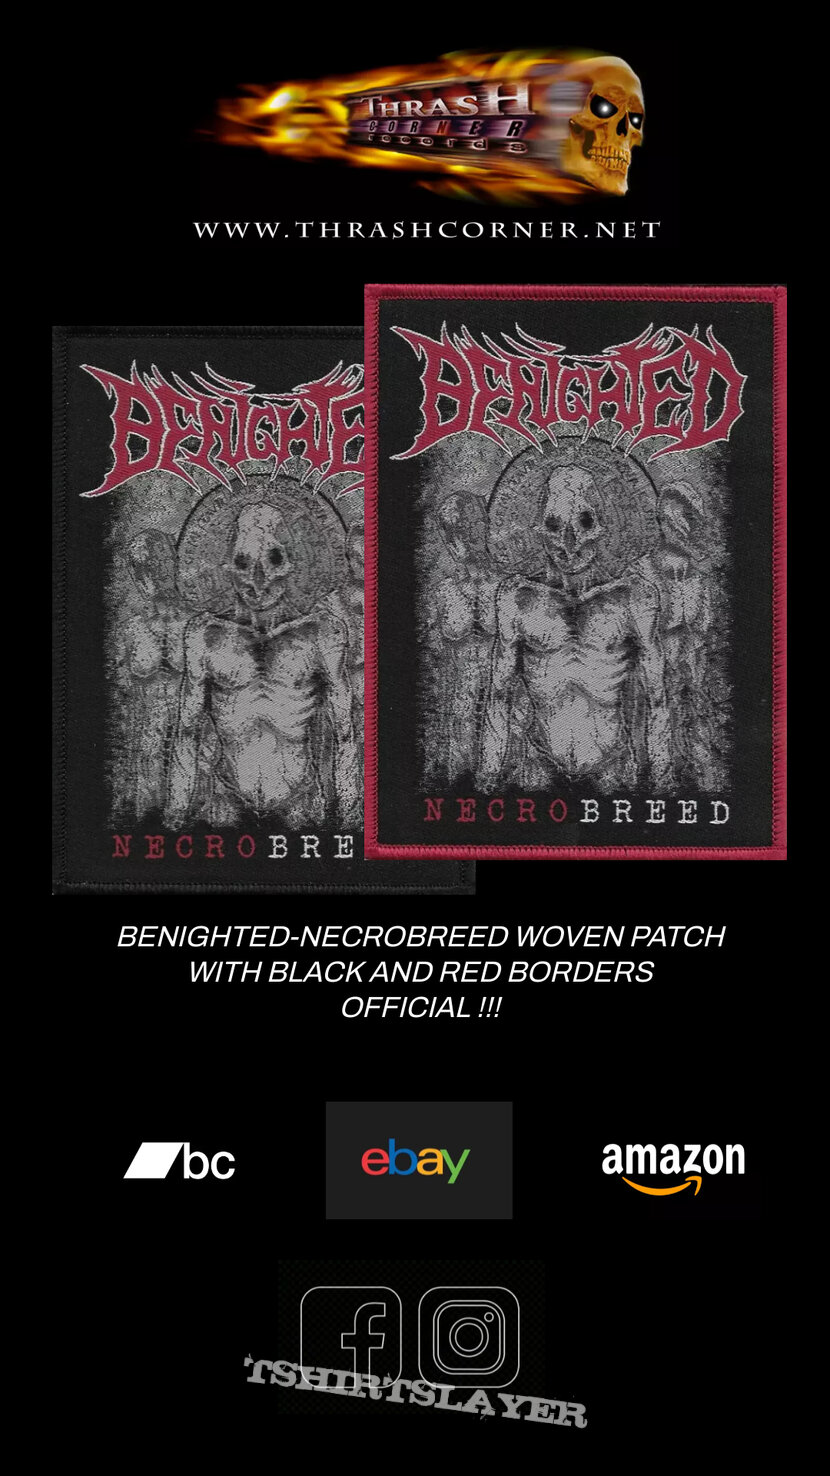 Benighted Necrobreed Woven Patch